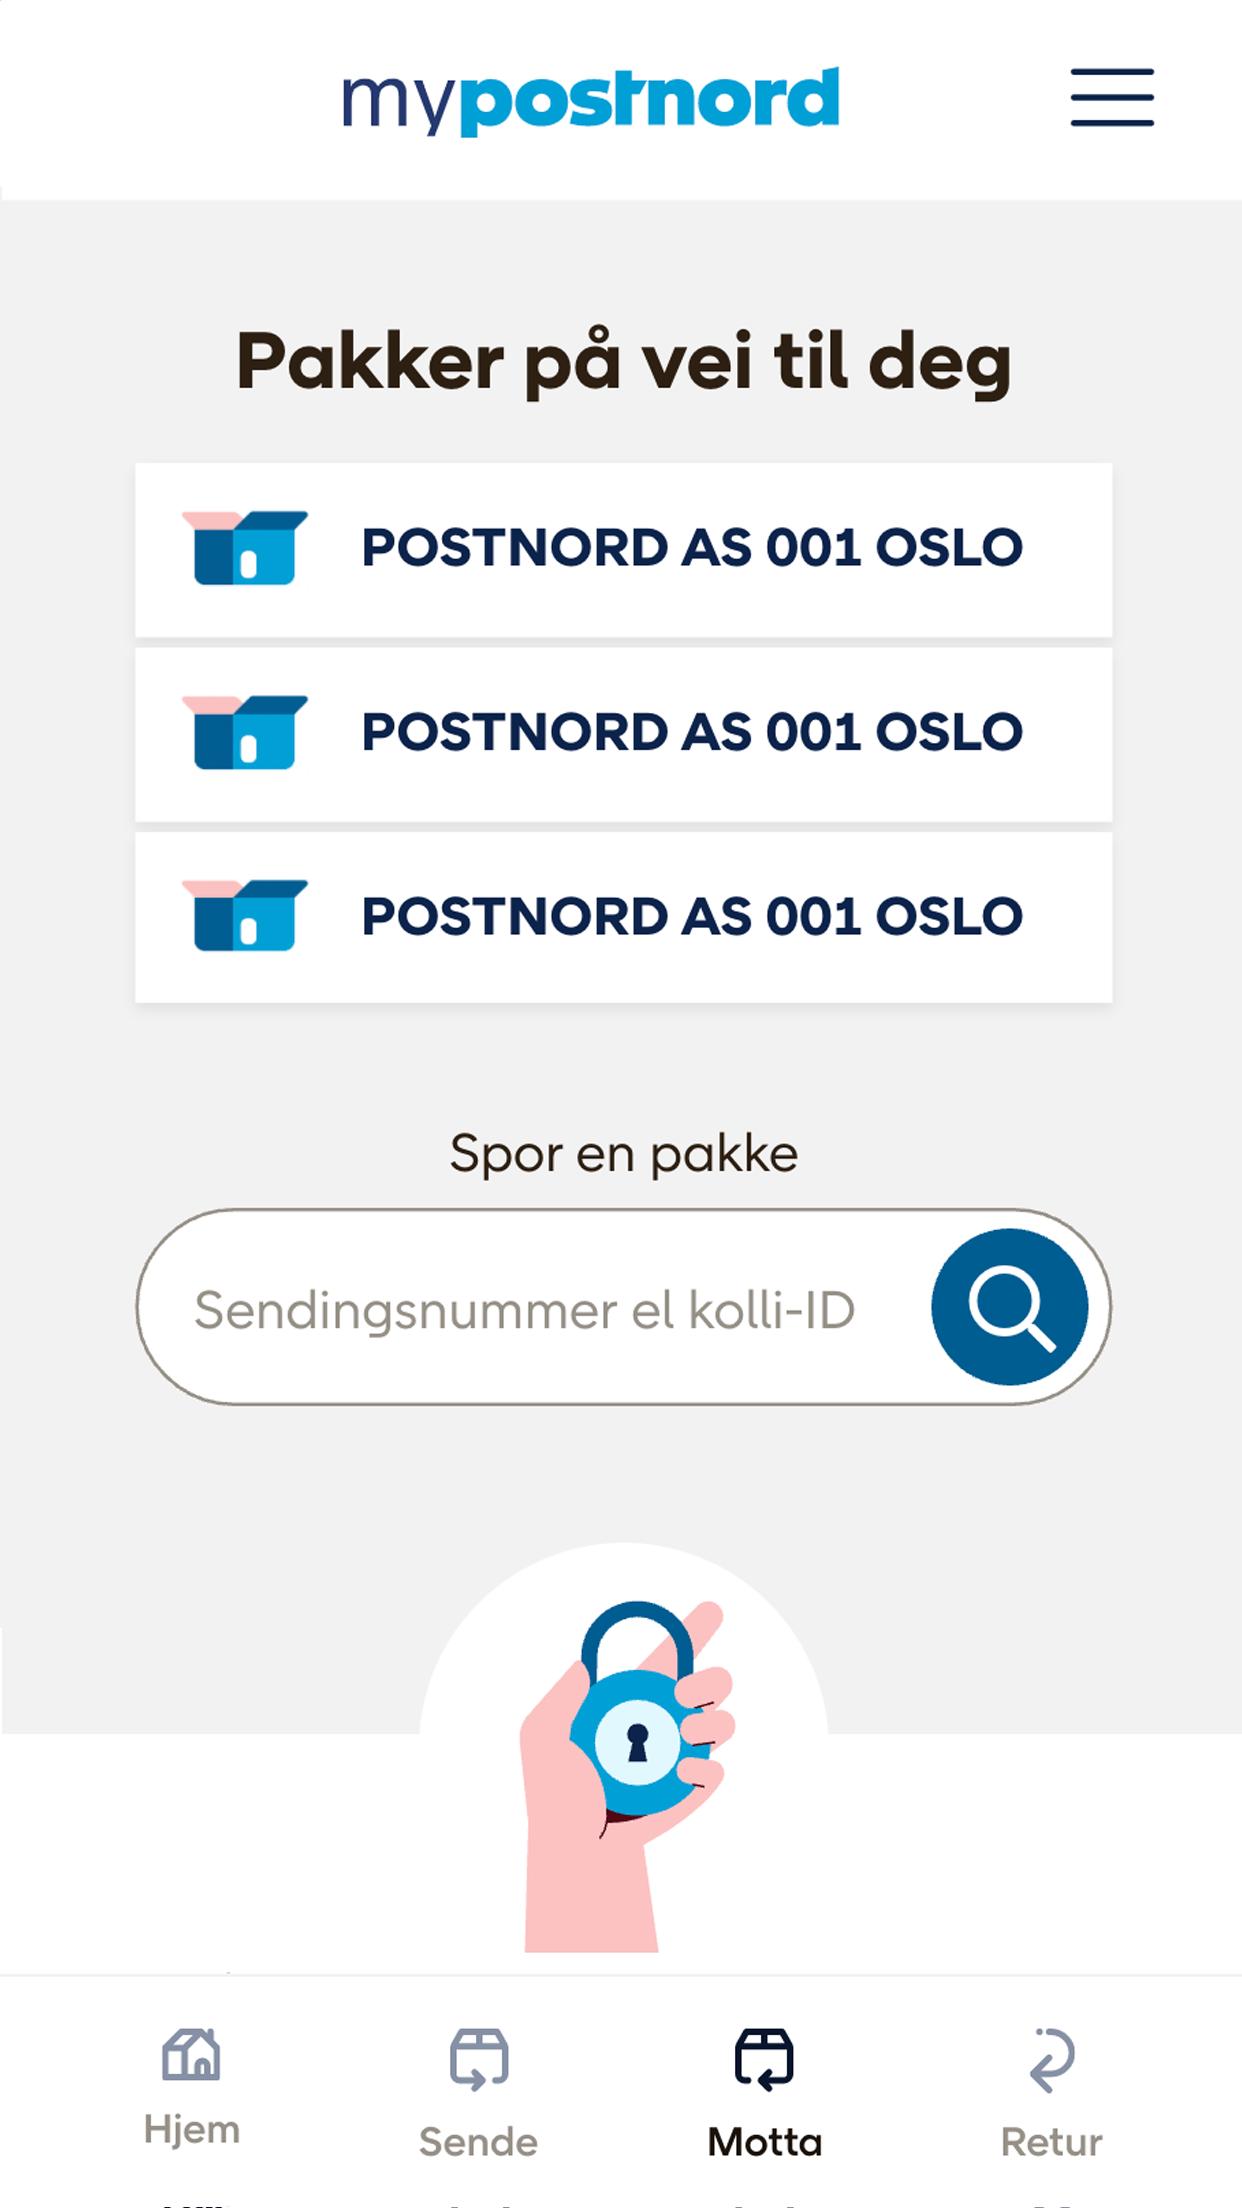 mypostnord for Android - APK Download